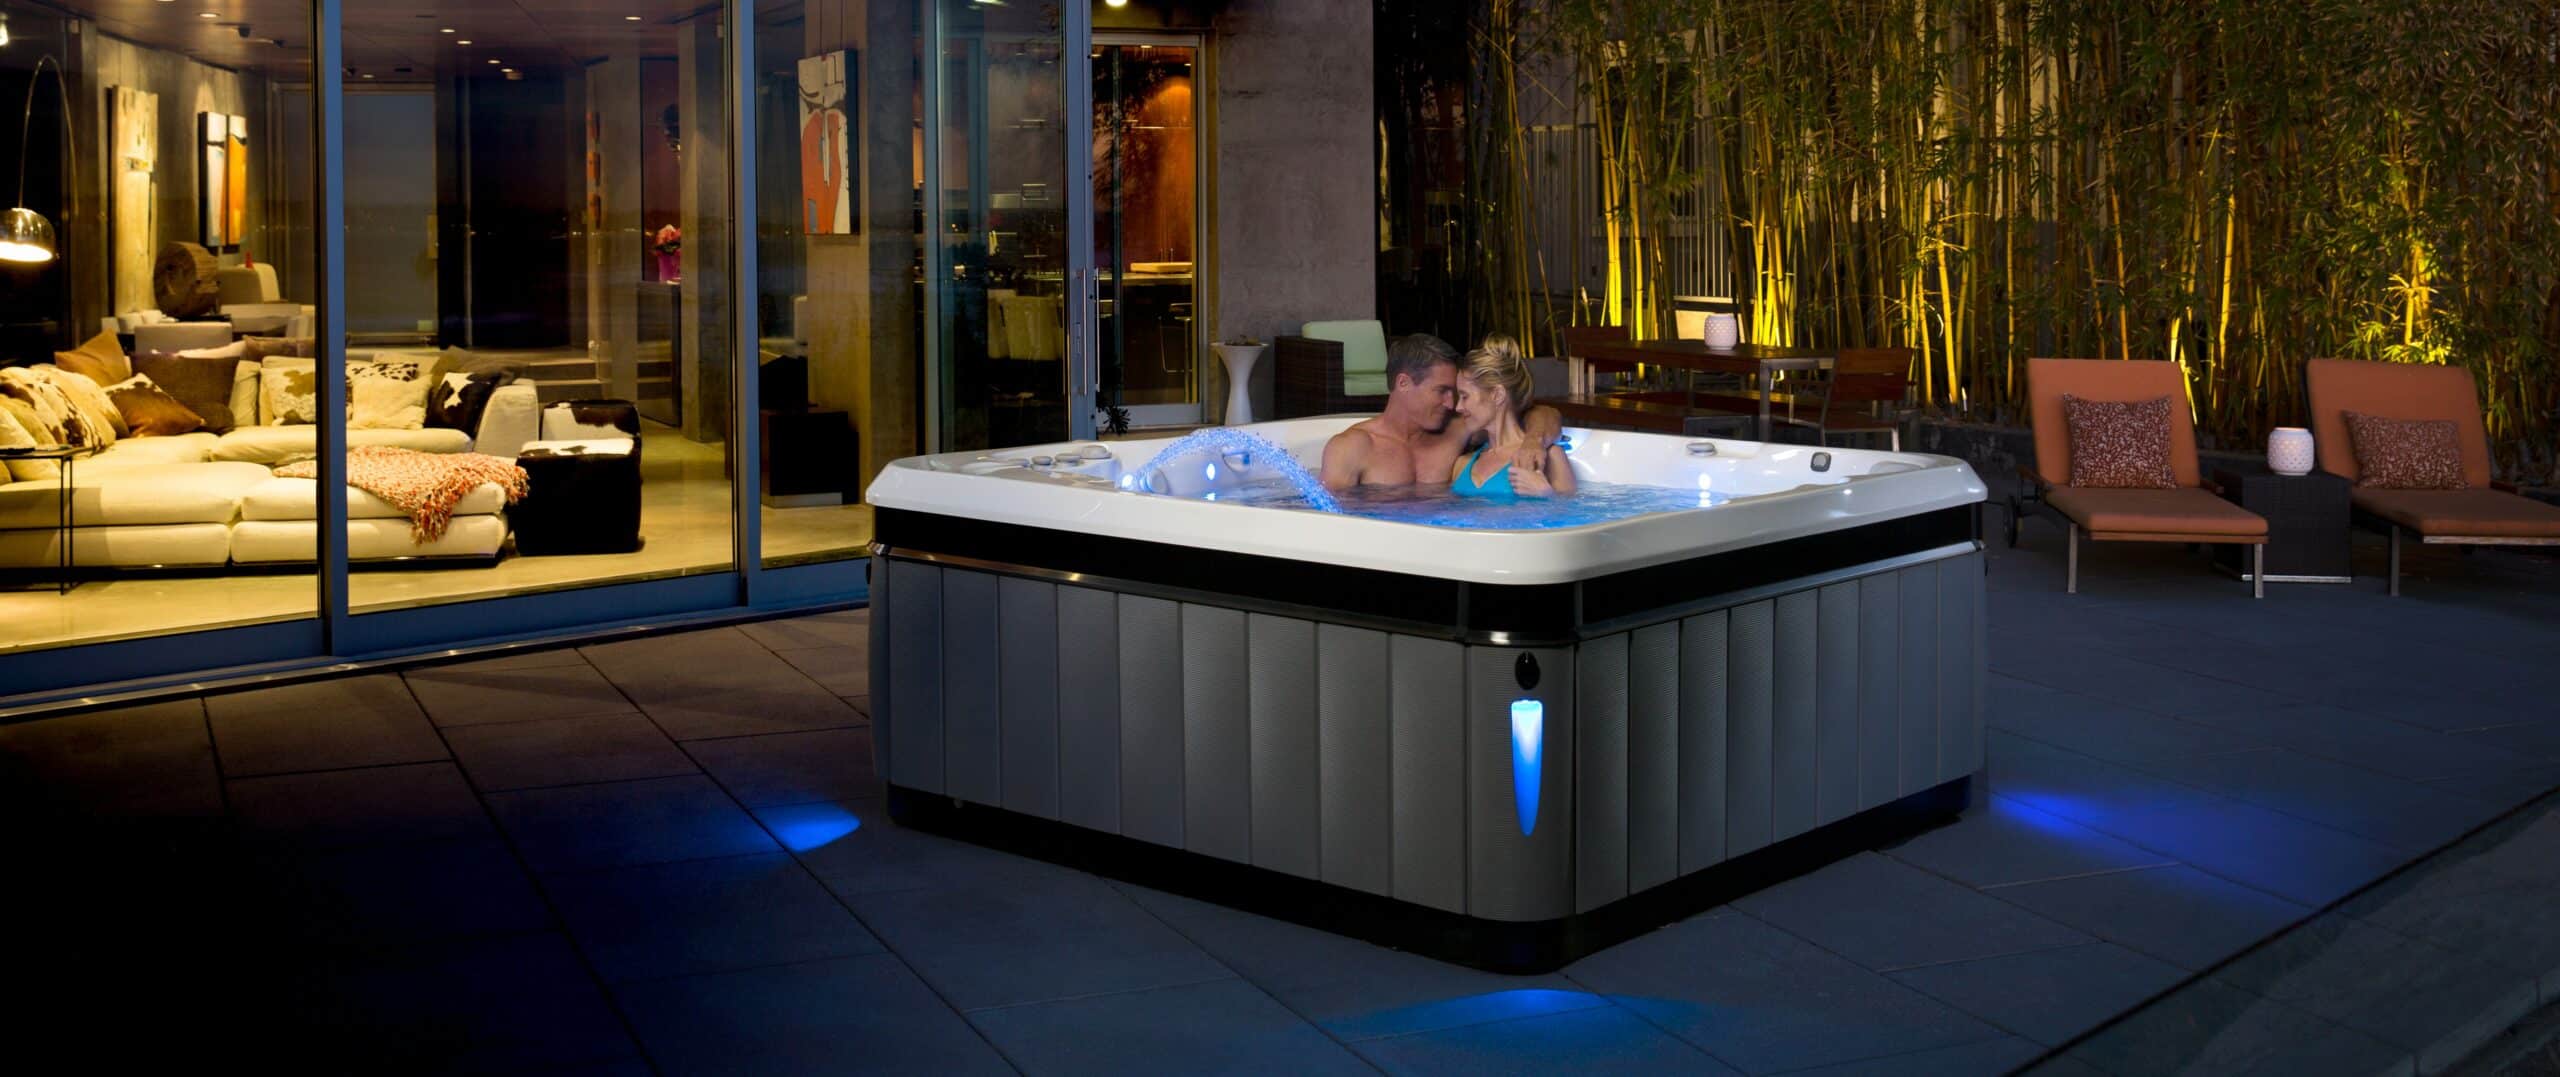 Couple enjoying romantic date in the hot tub